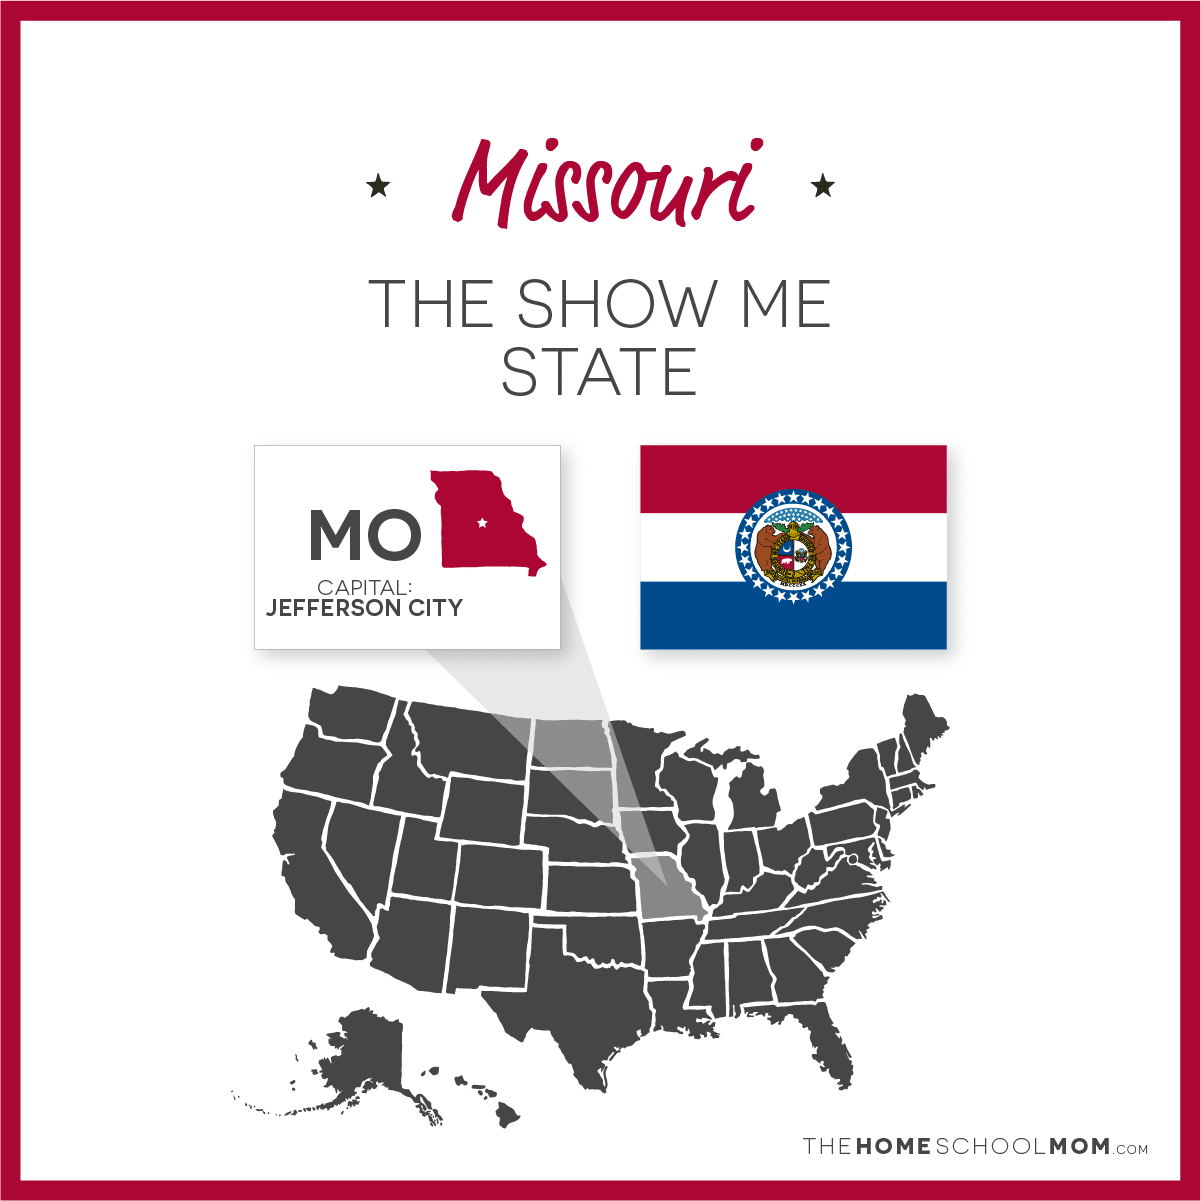 Map of US with Missouri highlighted and text Missouri - The Show Me State; capital – Jefferson City